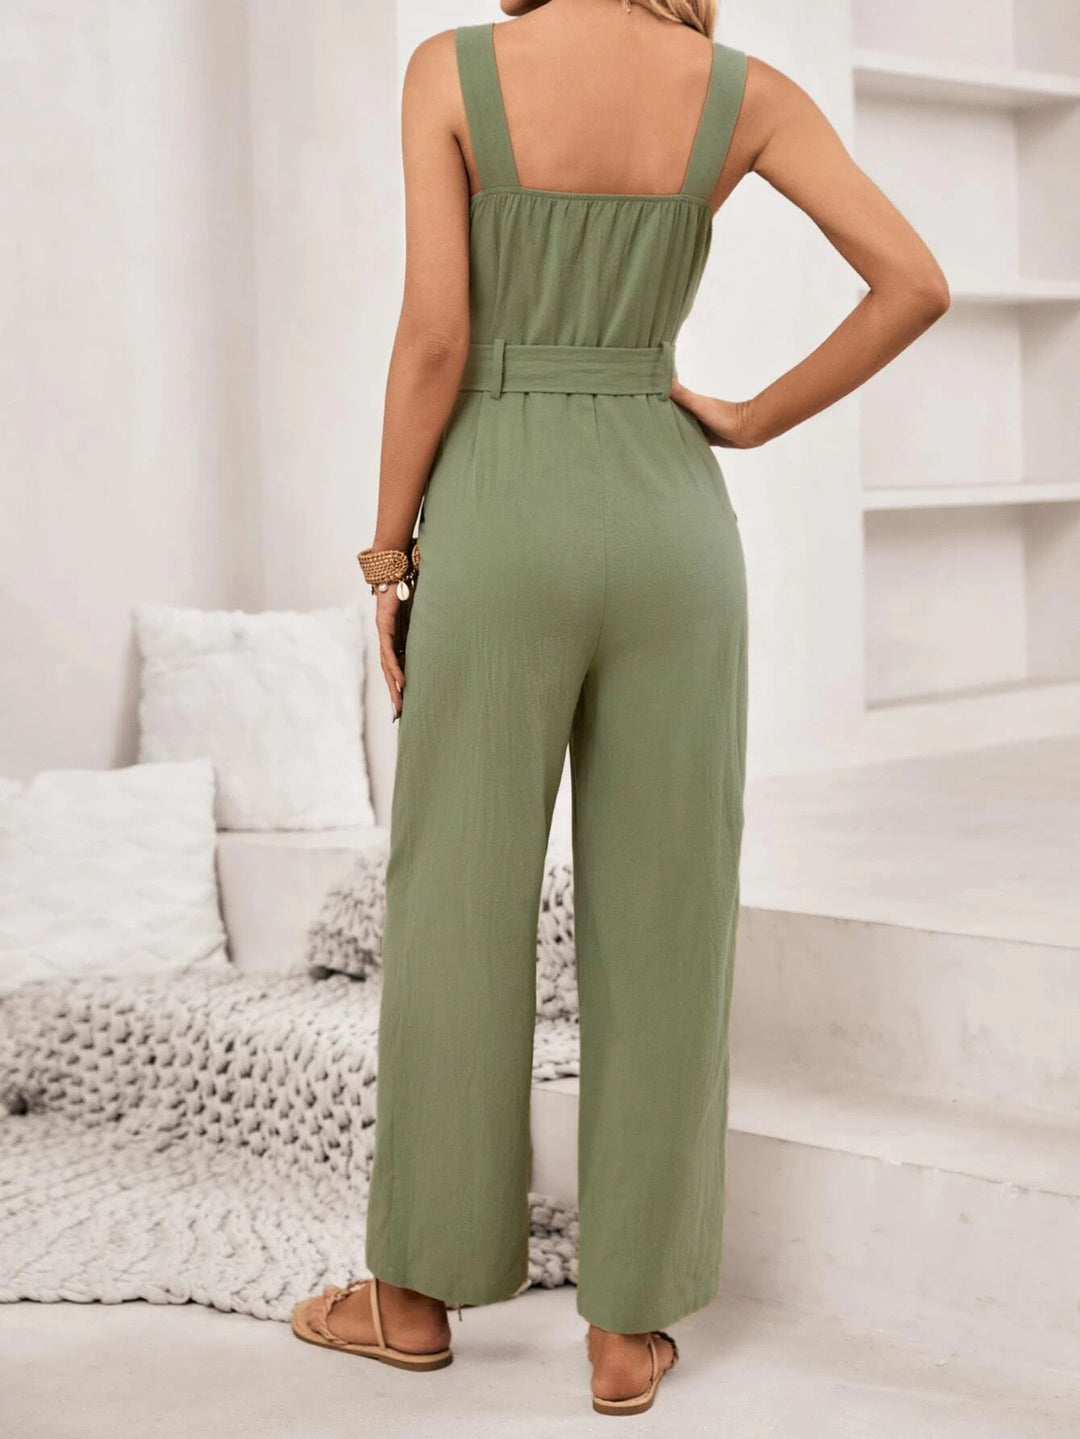 Button Front Belted Cami Jumpsuit